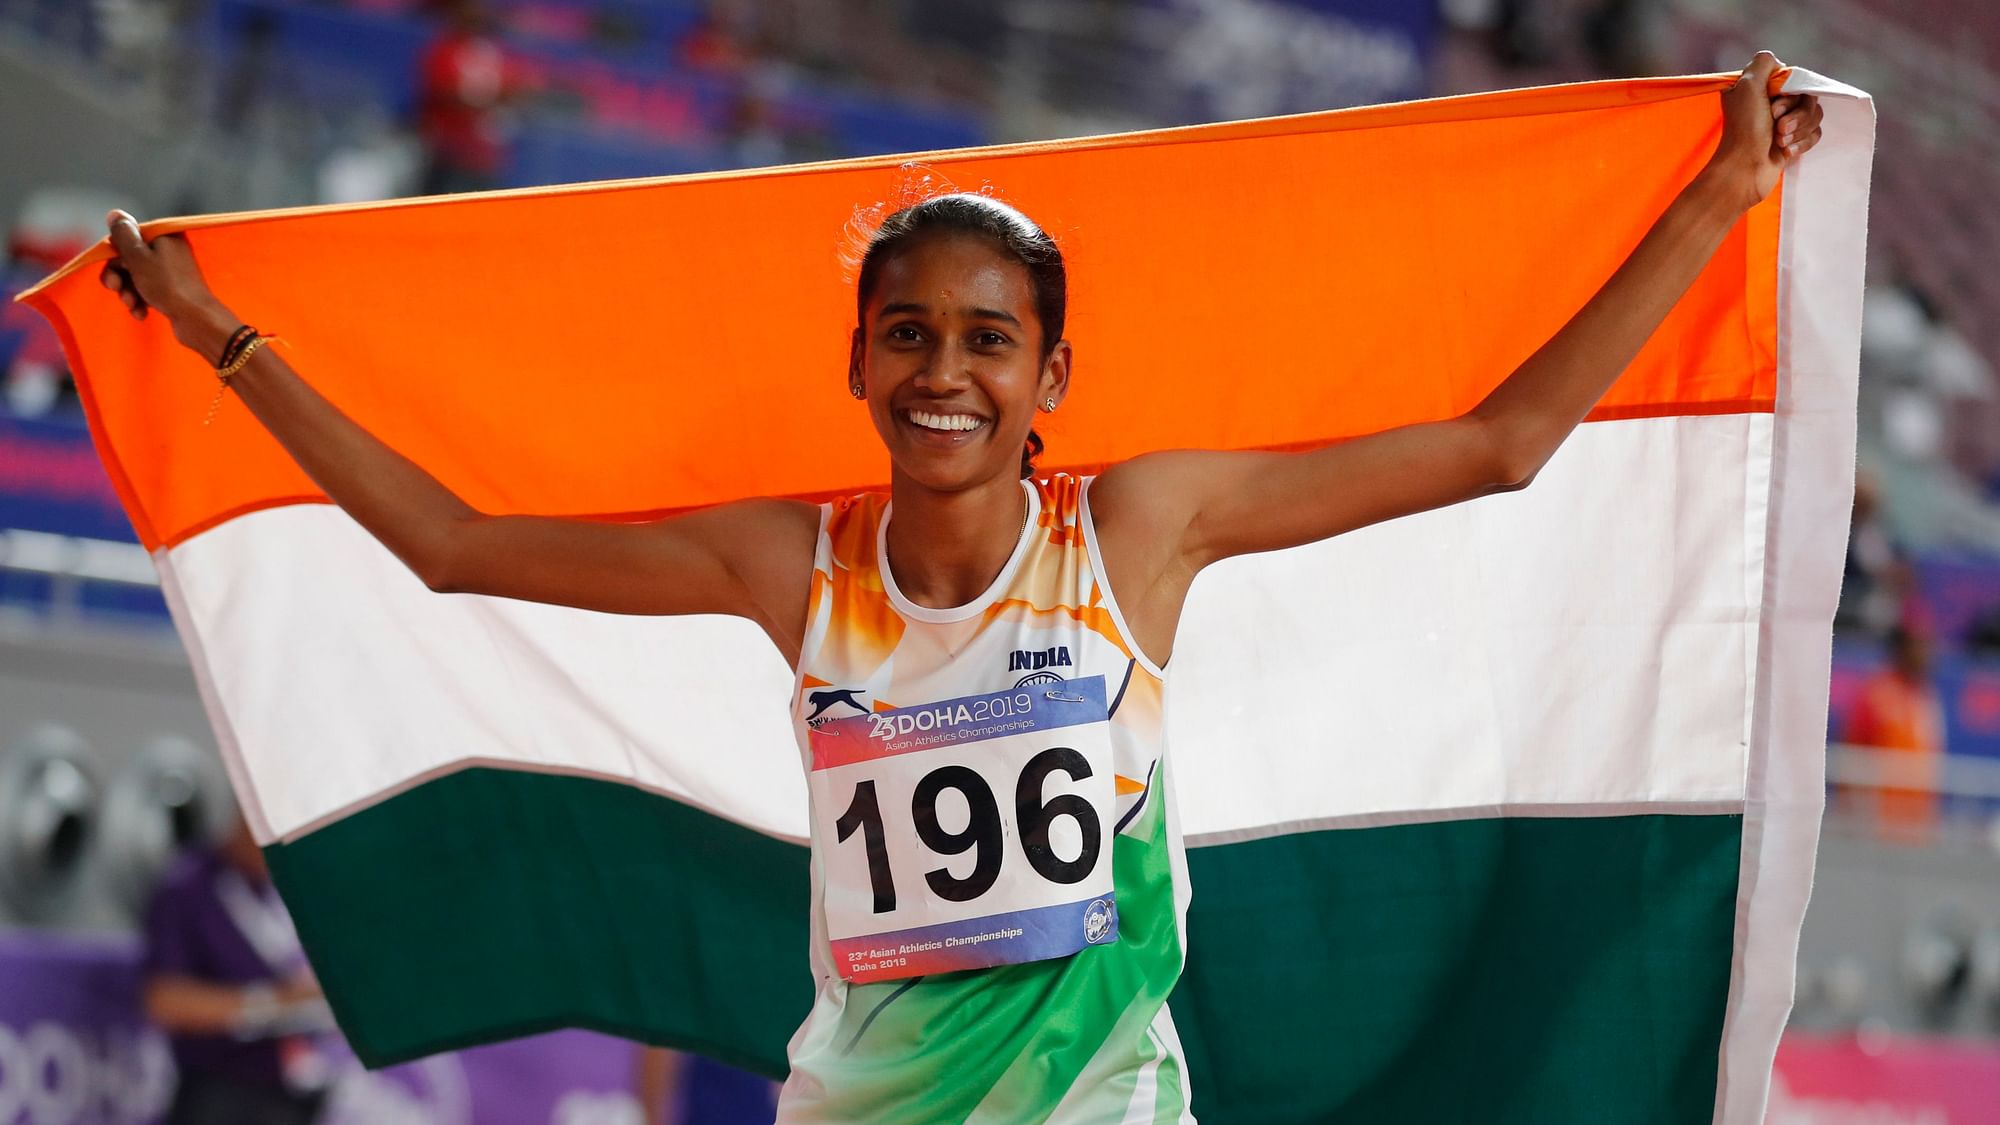 India’s Chitra unnikrishnan Palakeezh celebrates after winning gold in the women’s 1500-meters race final the Asian Athletics Championships in Doha, Qatar, Wednesday, April 24, 2019.&nbsp;